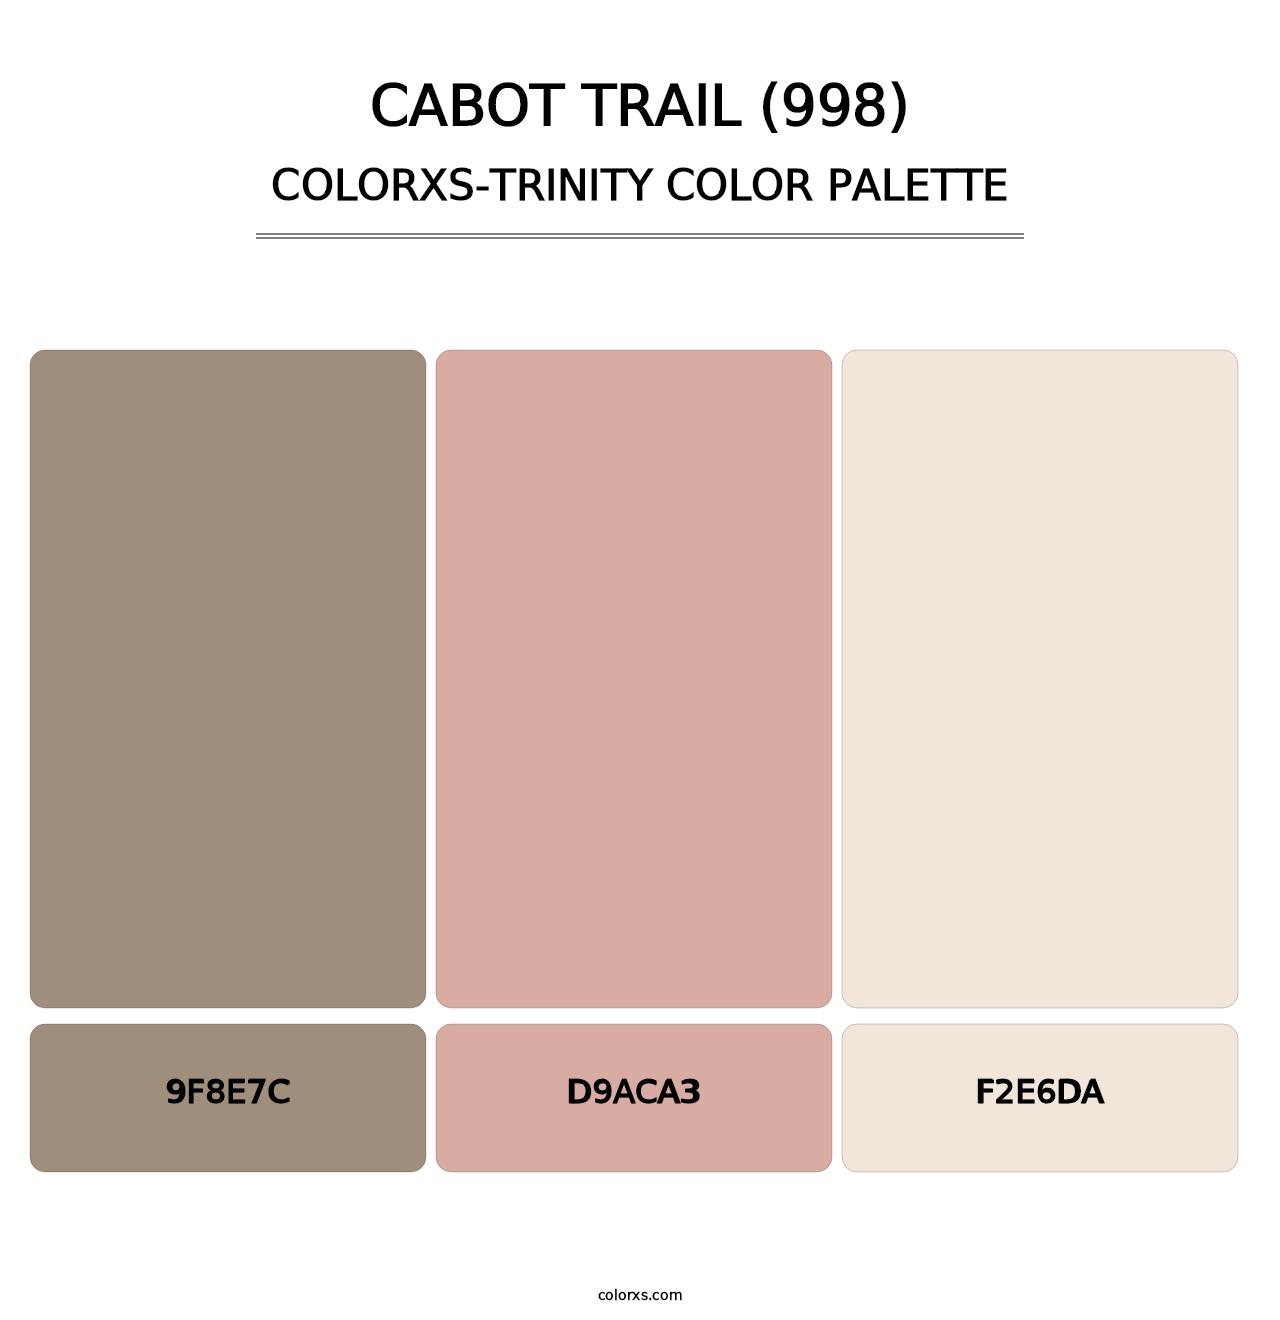 Cabot Trail (998) - Colorxs Trinity Palette